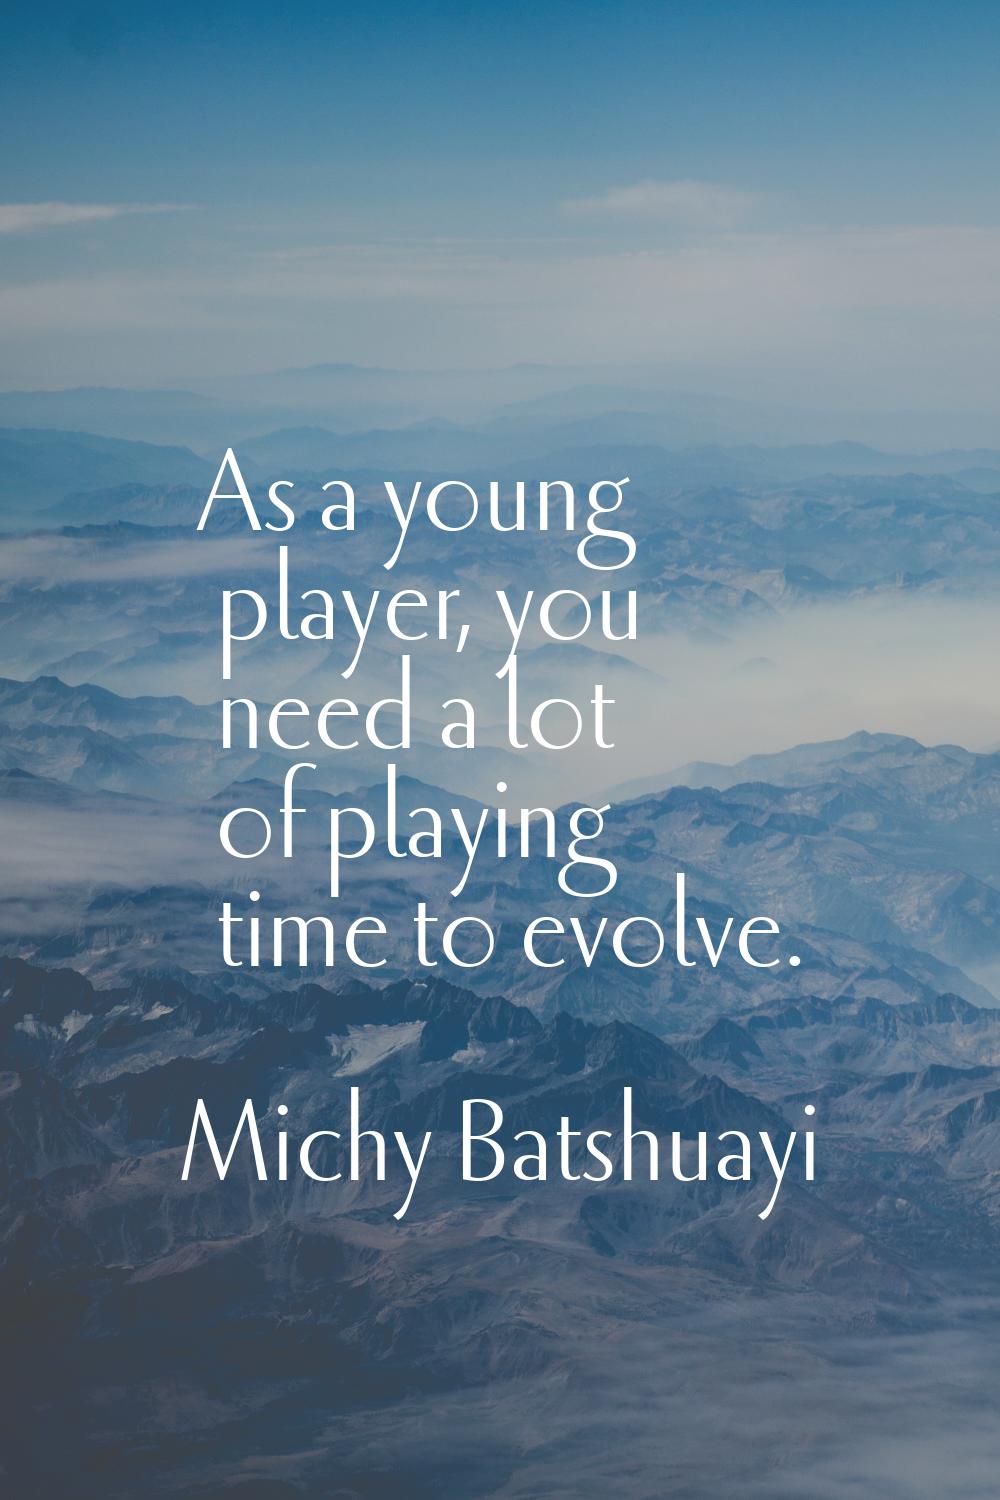 As a young player, you need a lot of playing time to evolve.